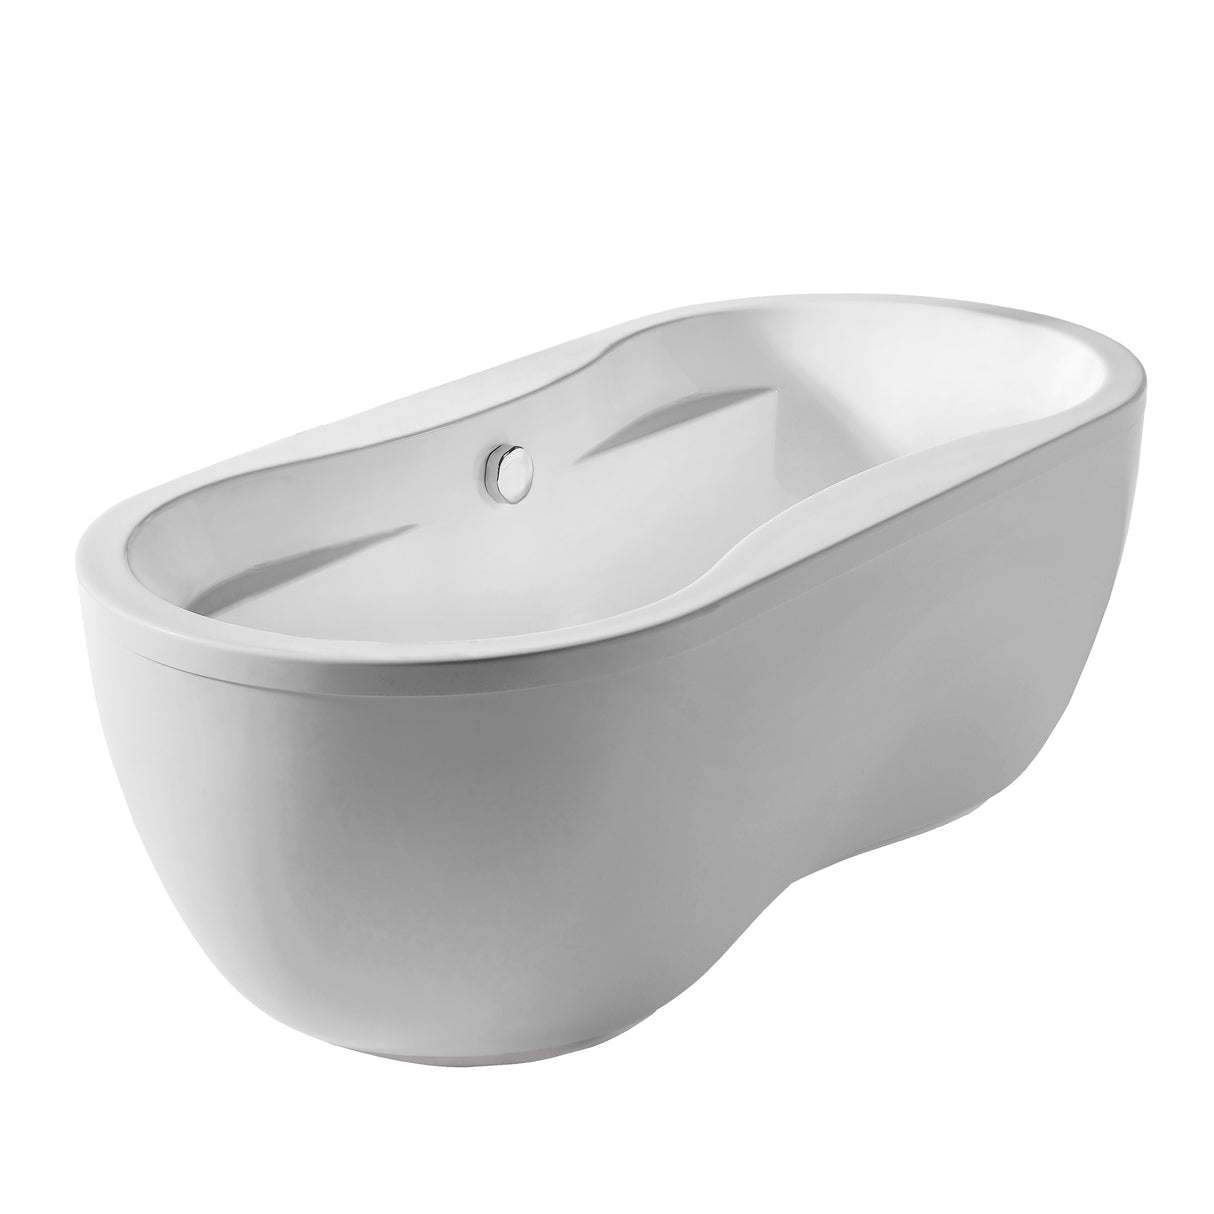 Bathhaus Oval Double Ended Dual Armrest Freestanding Lucite Acrylic Bathtub with a Chrome Mechanical Pop-up Waste and a Chrome Center Drain with Internal Overflow